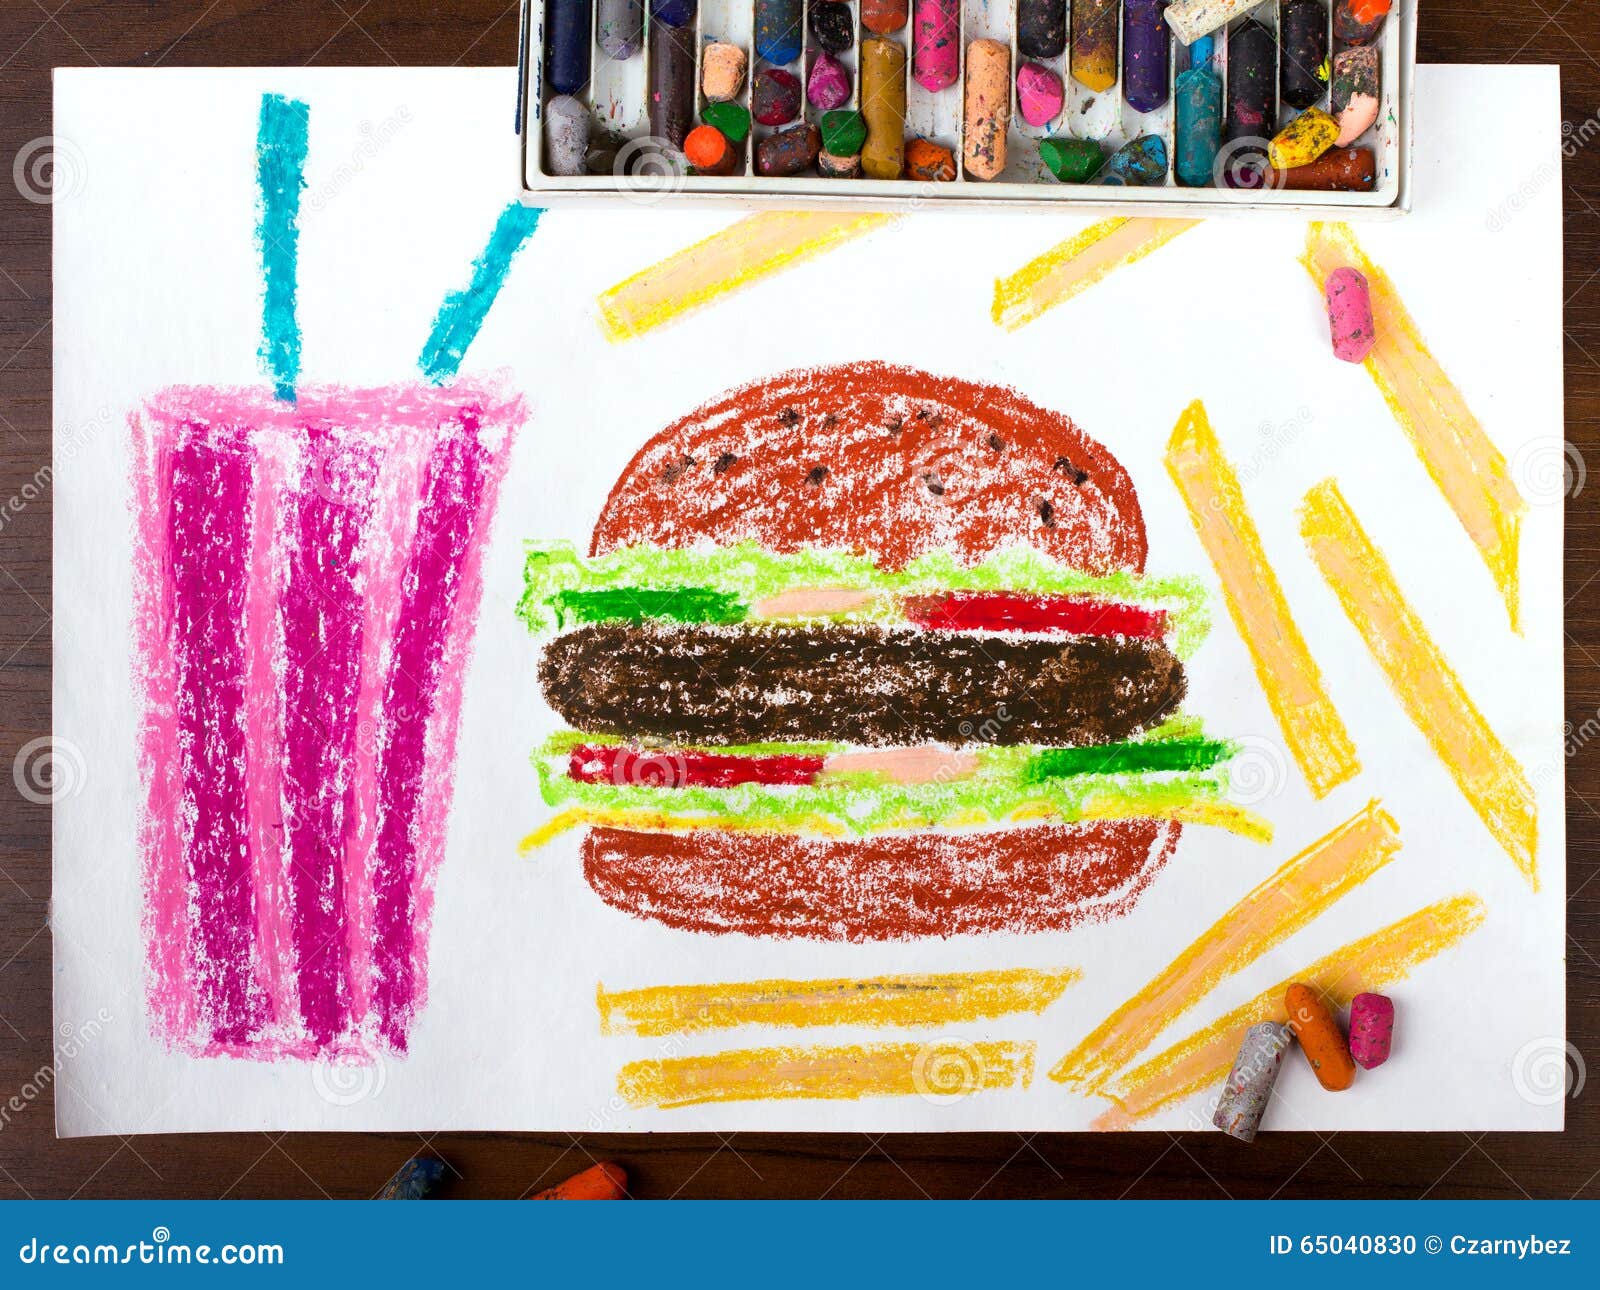 21,200+ Drawing Of Unhealthy Foods Stock Photos, Pictures & Royalty-Free  Images - iStock